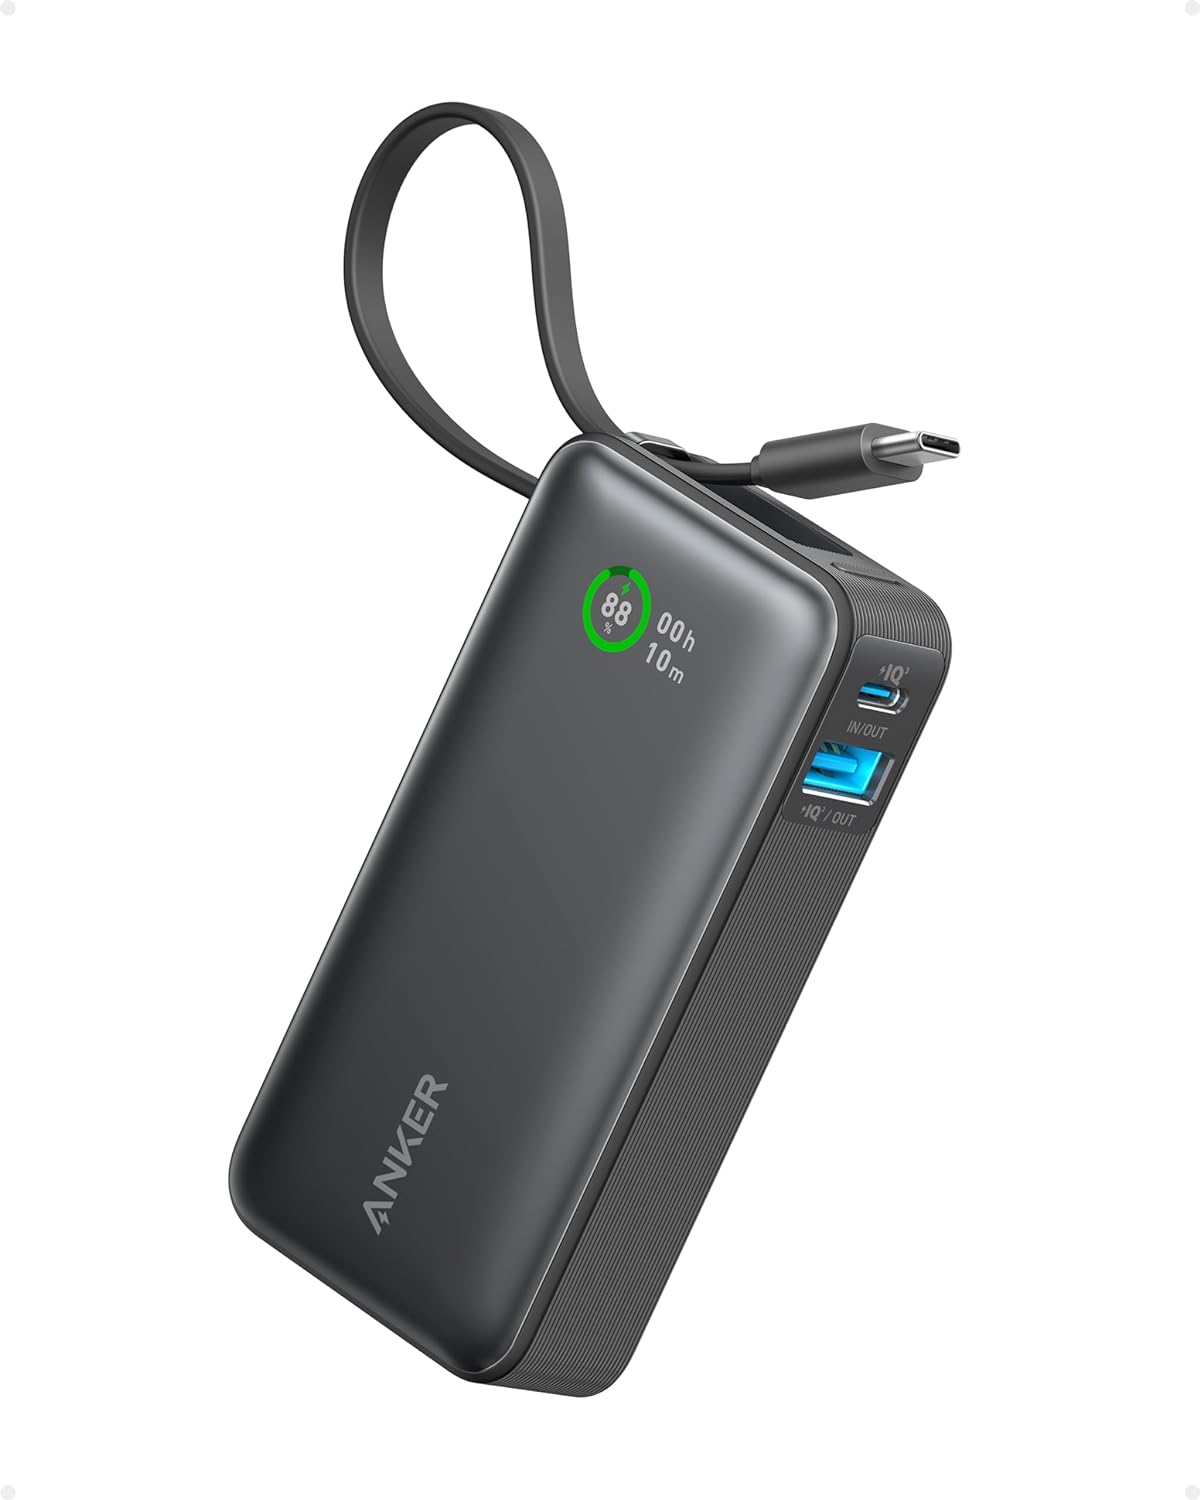 Anker 533 Nano Power Bank 30W Built-In USB-C Cable